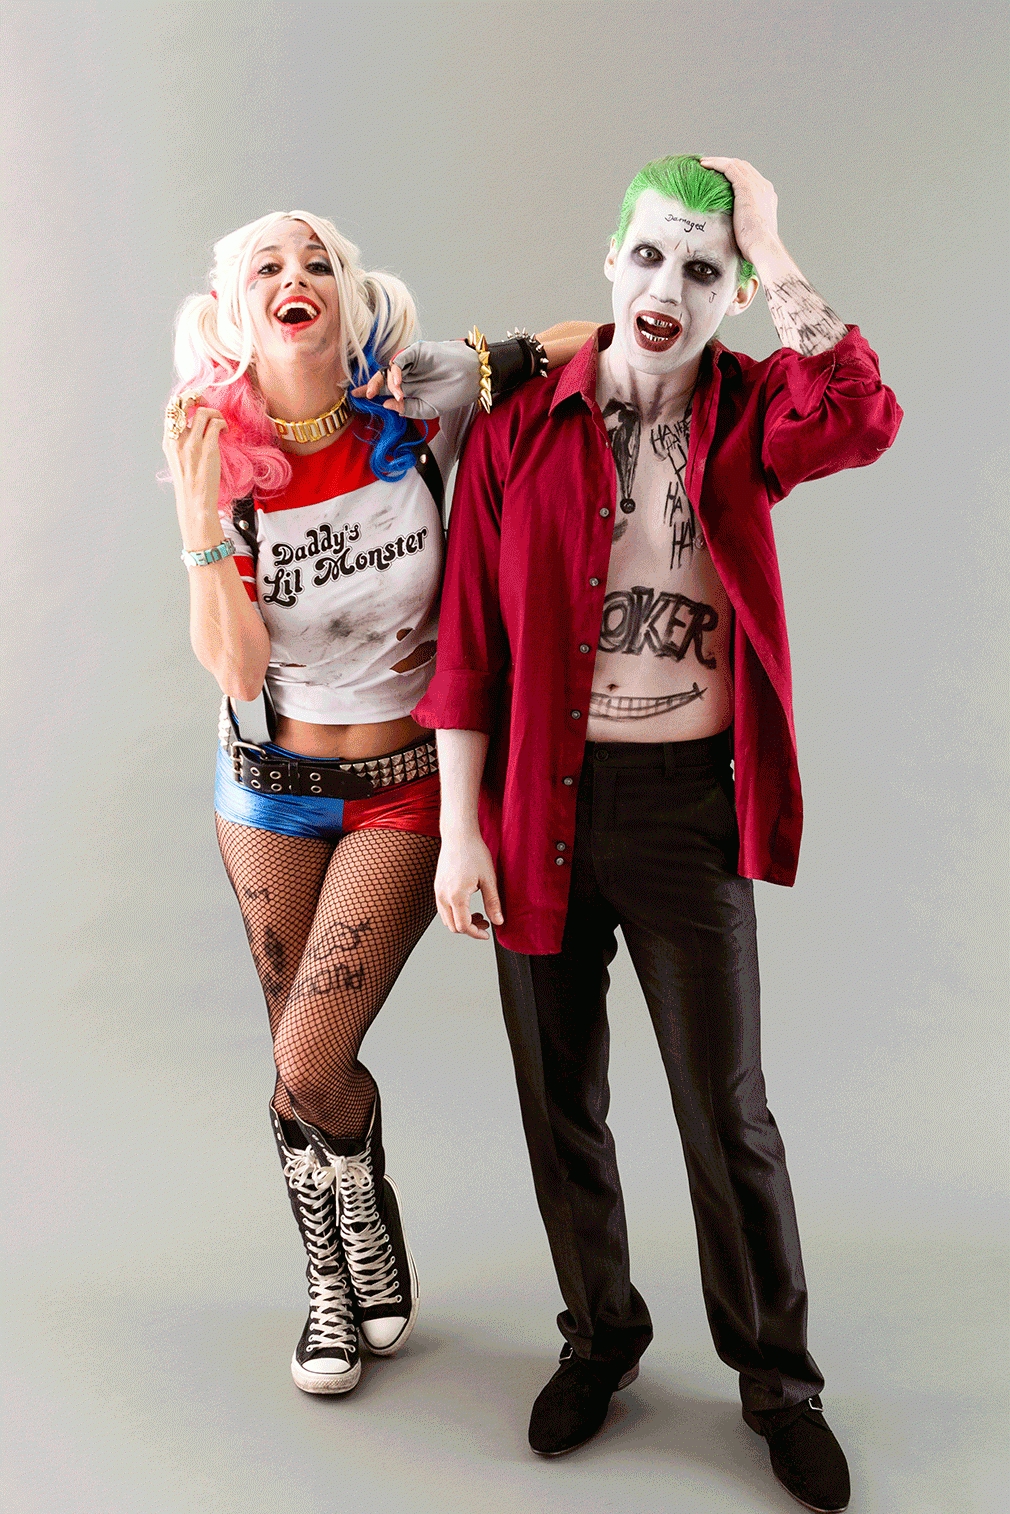 10 Lovely His And Hers Halloween Costume Ideas save this diy suicide squad couples halloween costume idea to become 2 2023